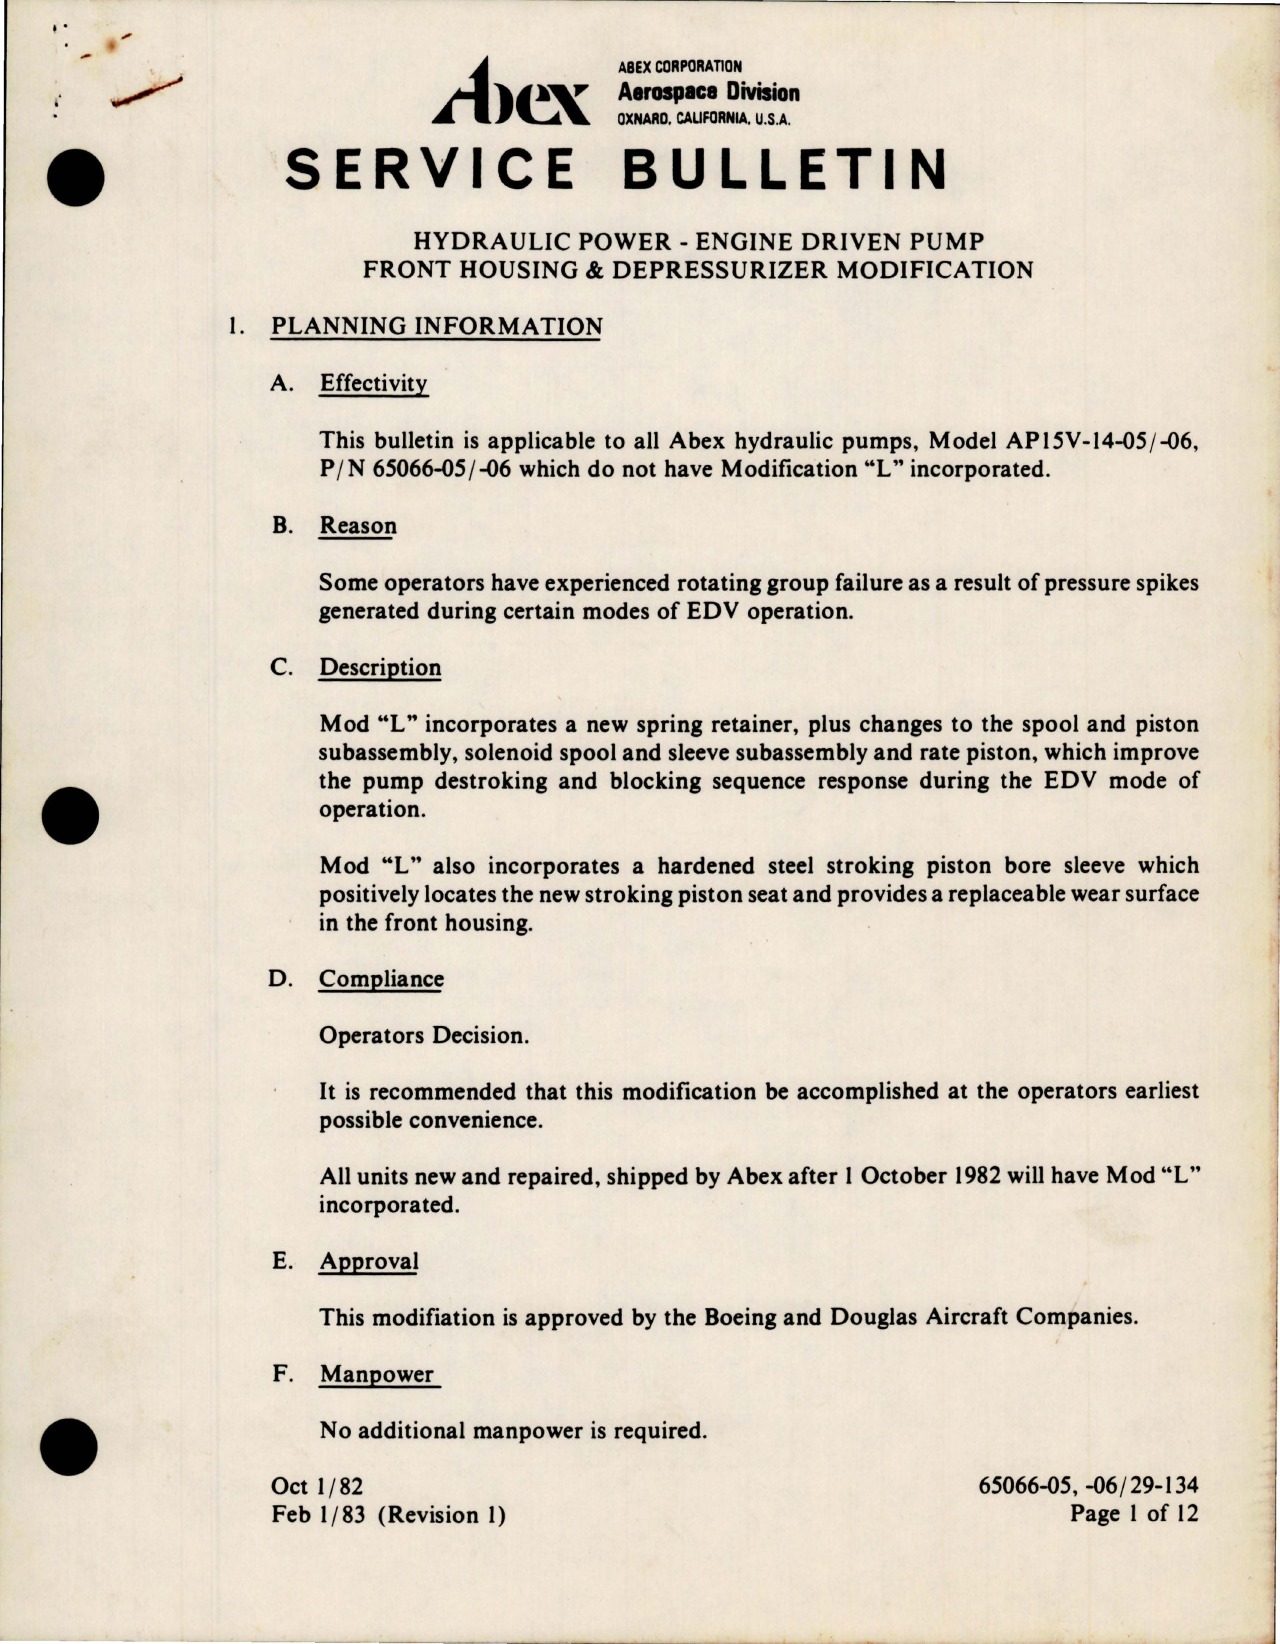 Sample page 1 from AirCorps Library document: Hydraulic Power - Engine Driven Pump - Front Housing and Depressurizer Modification - Model AP15V-14-05 and AP15V-14-06 